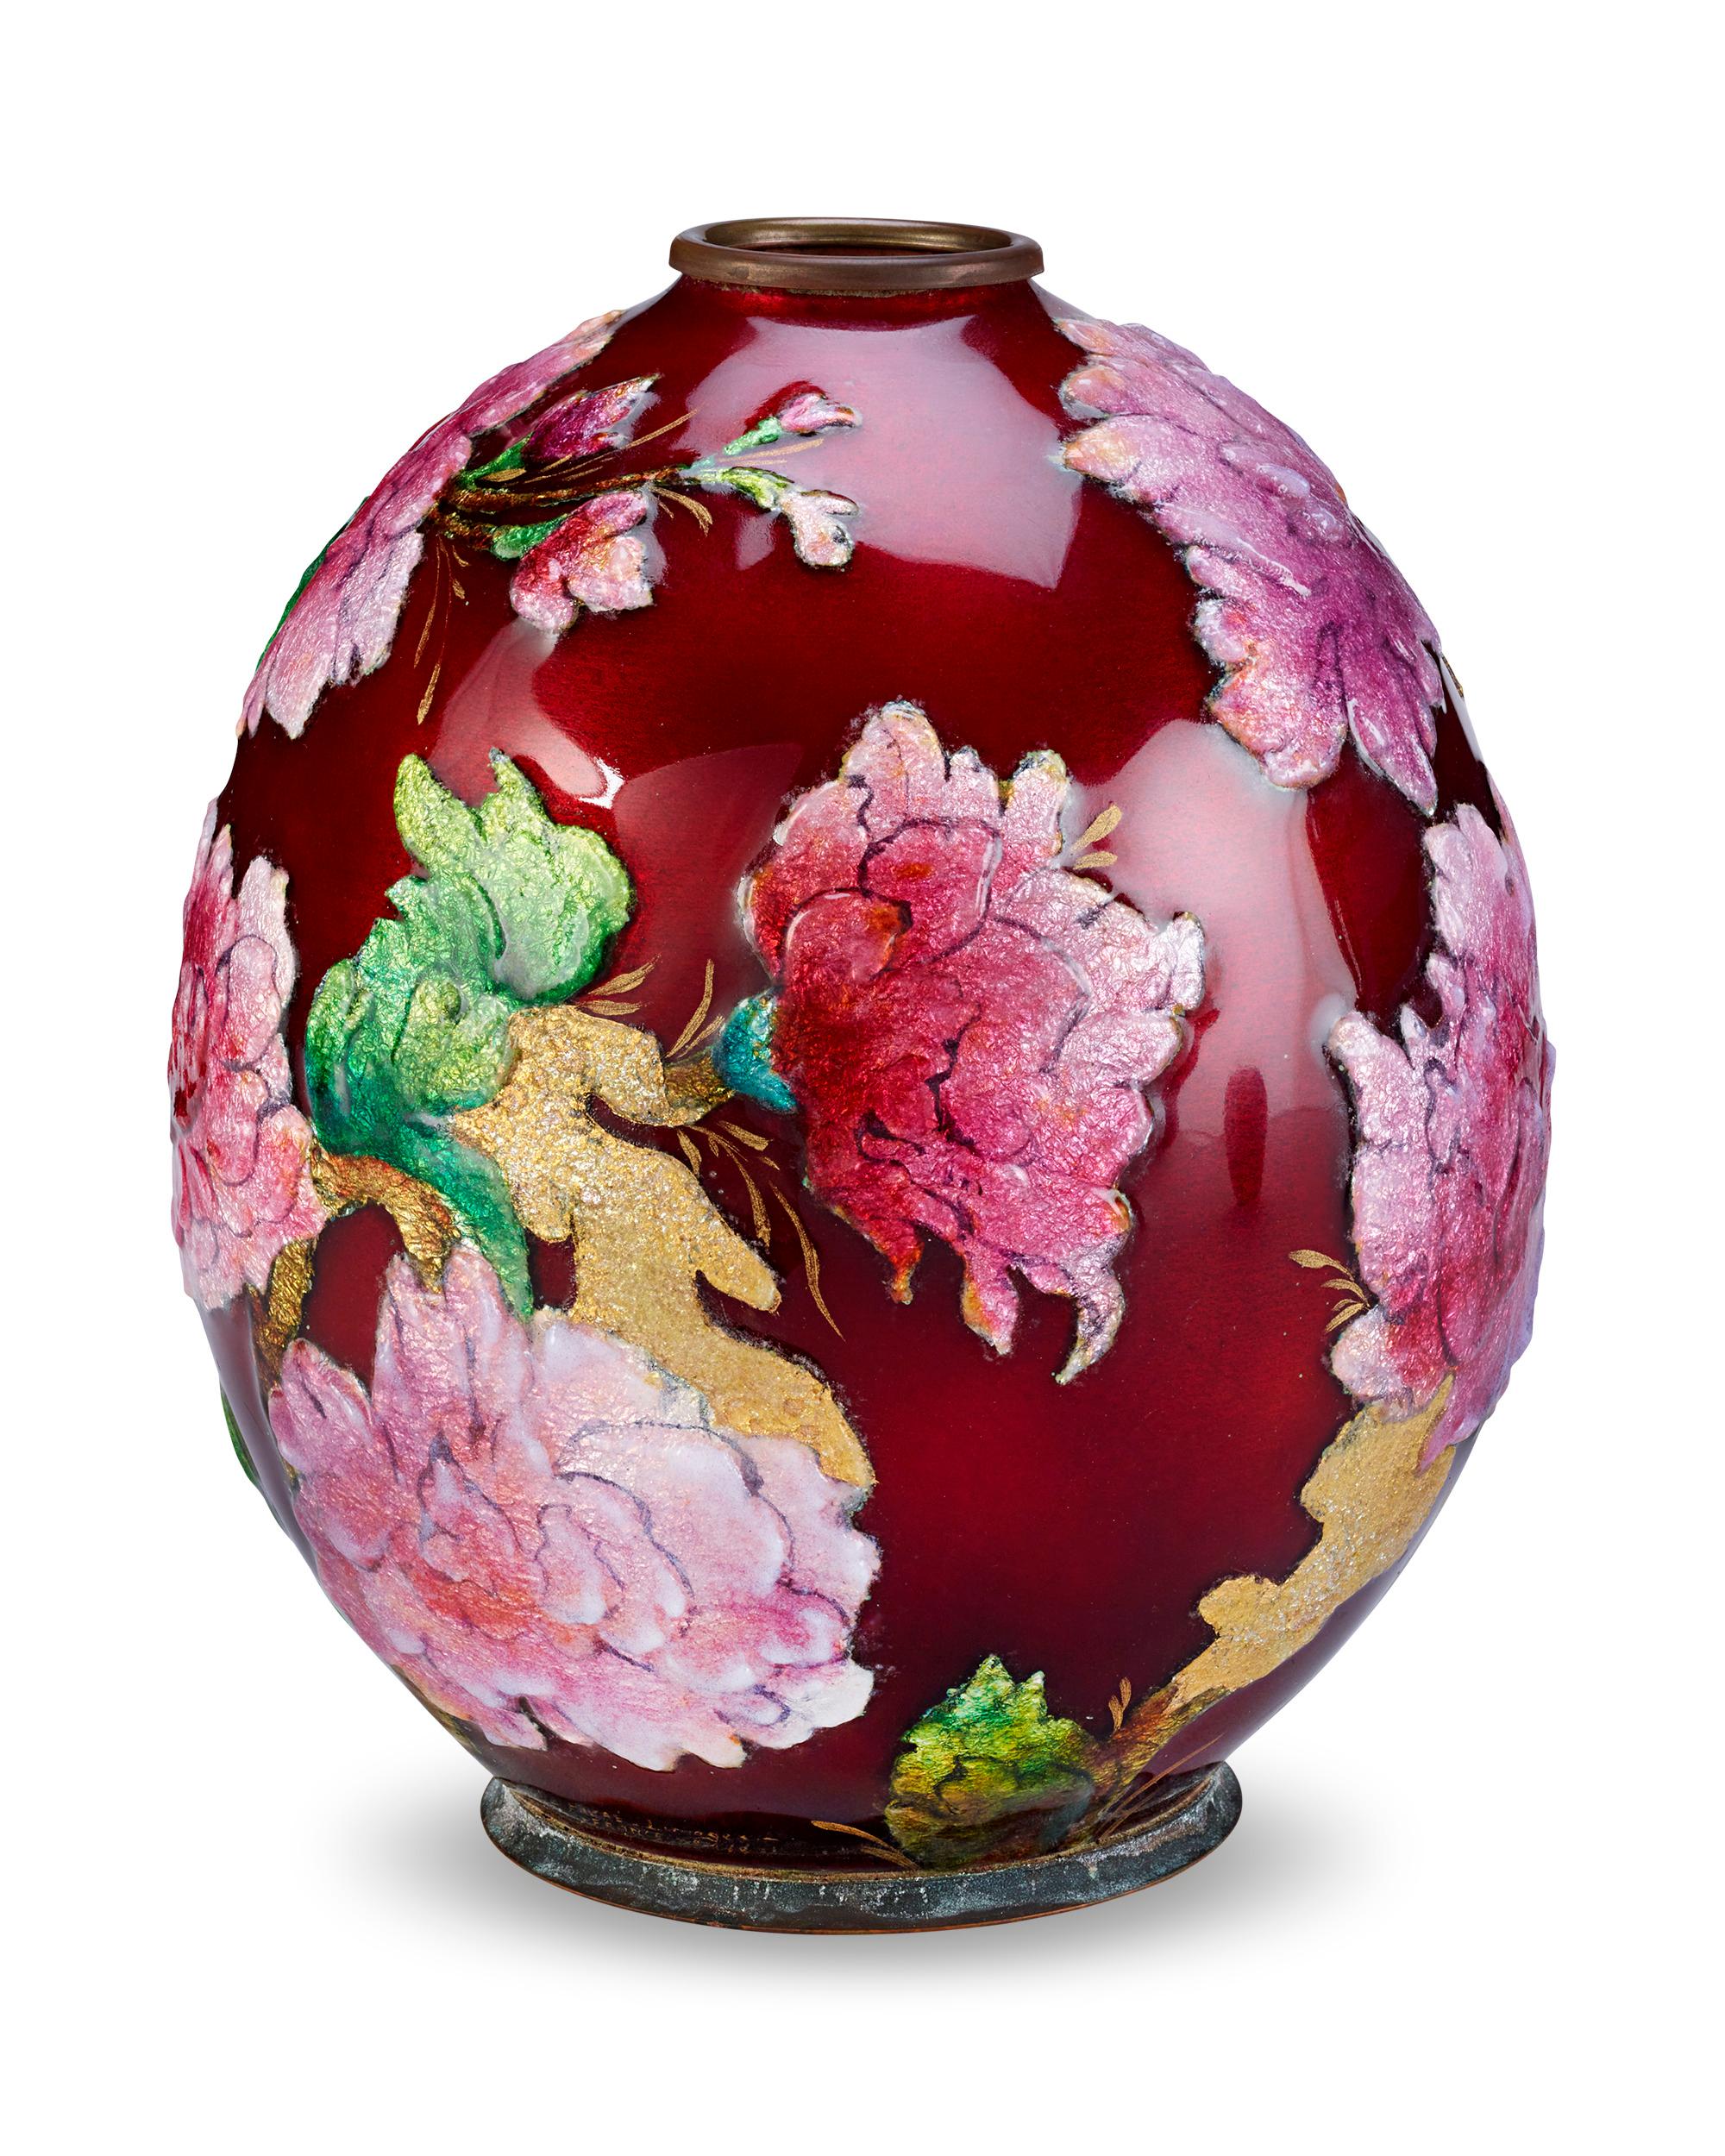 Delicate pink flowers burst forth from a vibrant red ground in this enameled vase by Camille Fauré. Executed using his signature technique, the vase's copper form is covered in the silver leaf and richly colored enamel that give Fauré's pieces their